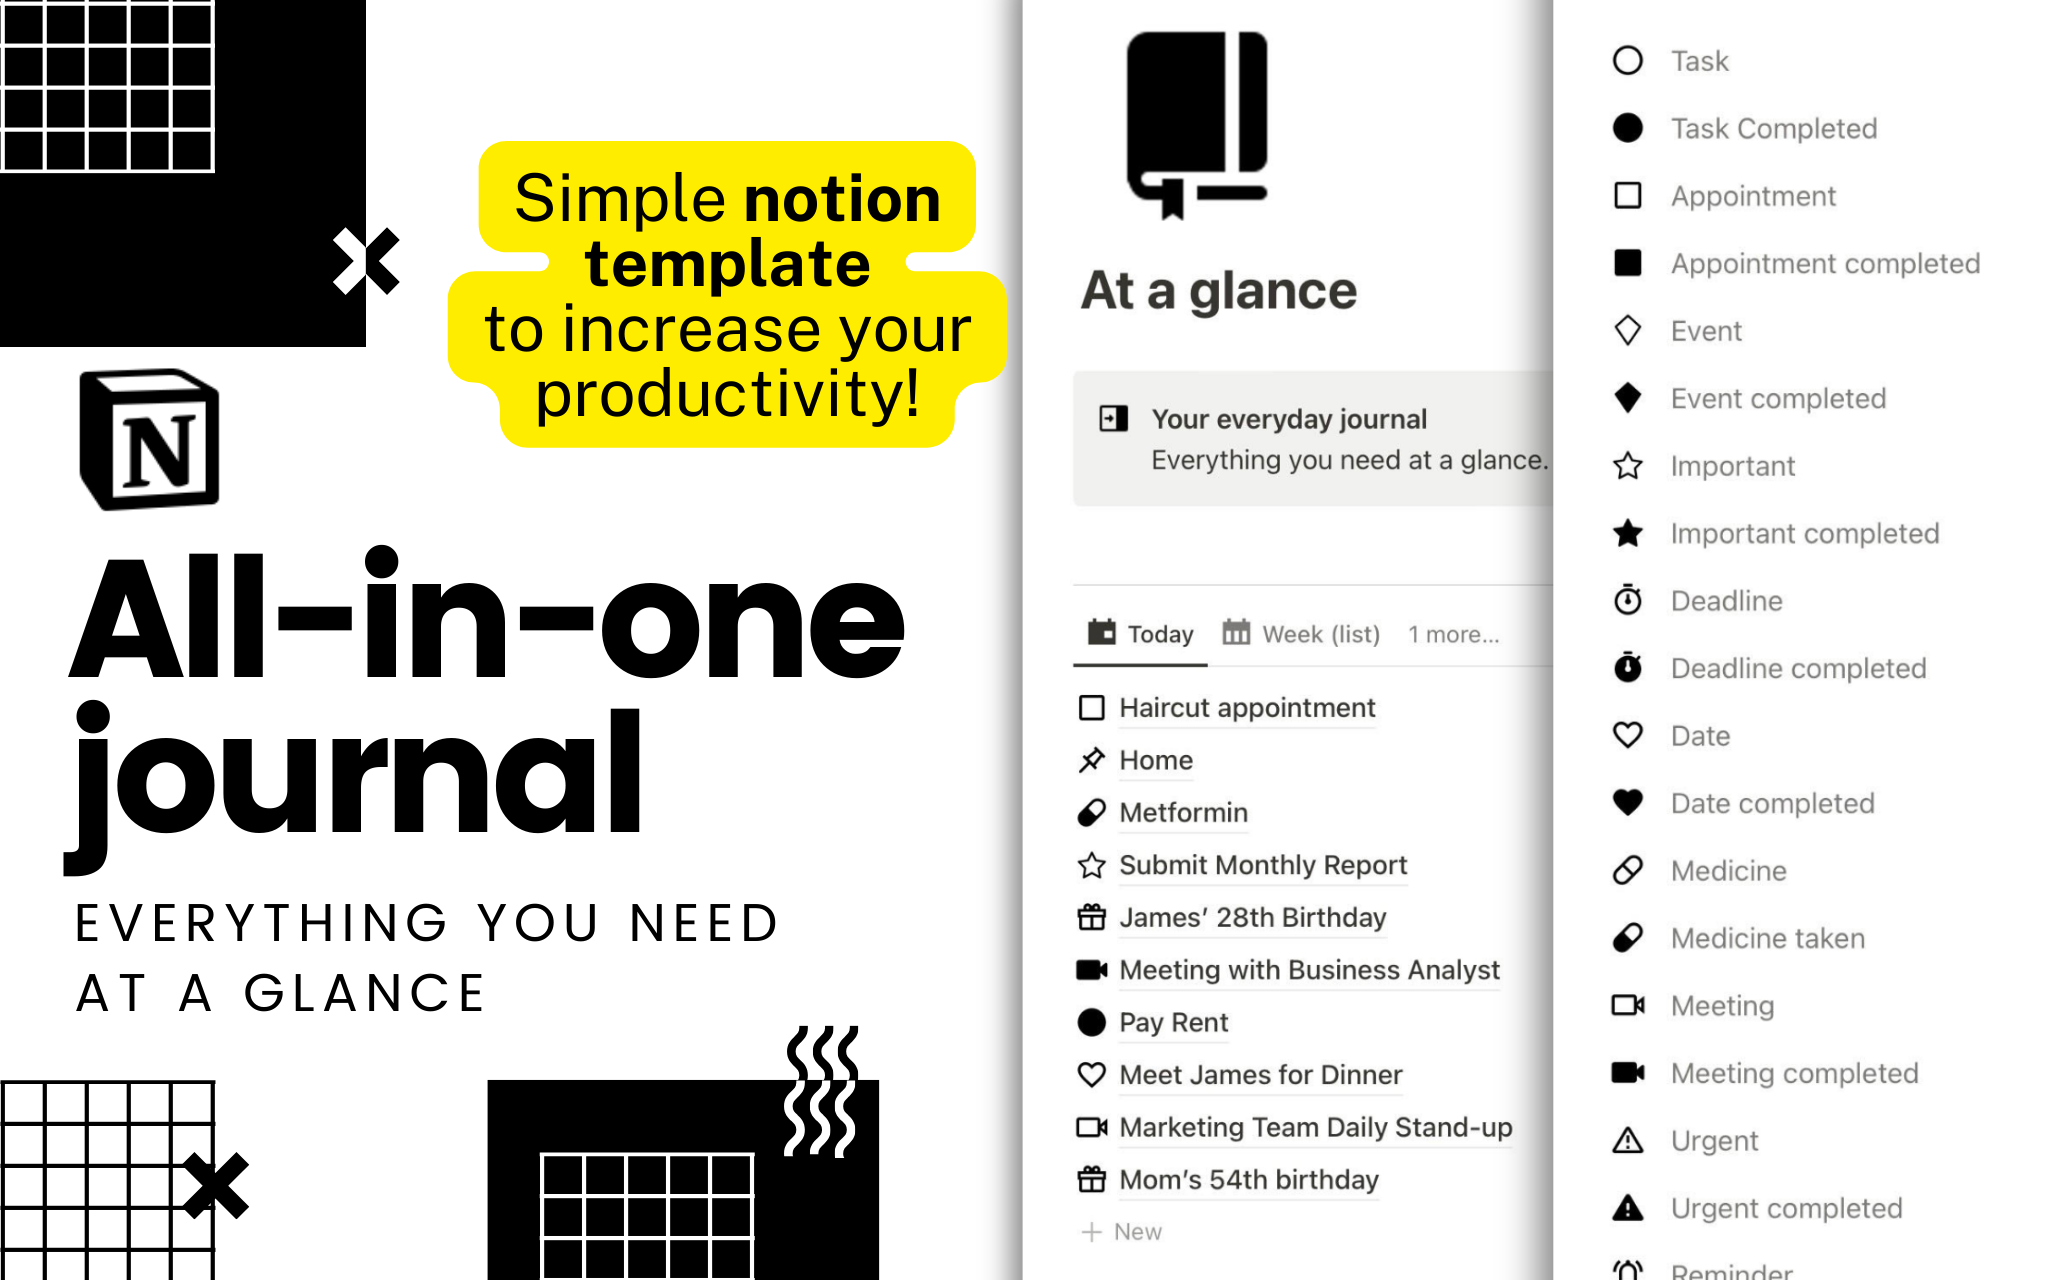 Stop overcomplicating your everyday task planning with this simple and user-friendly notion template, by having everything at a glance.